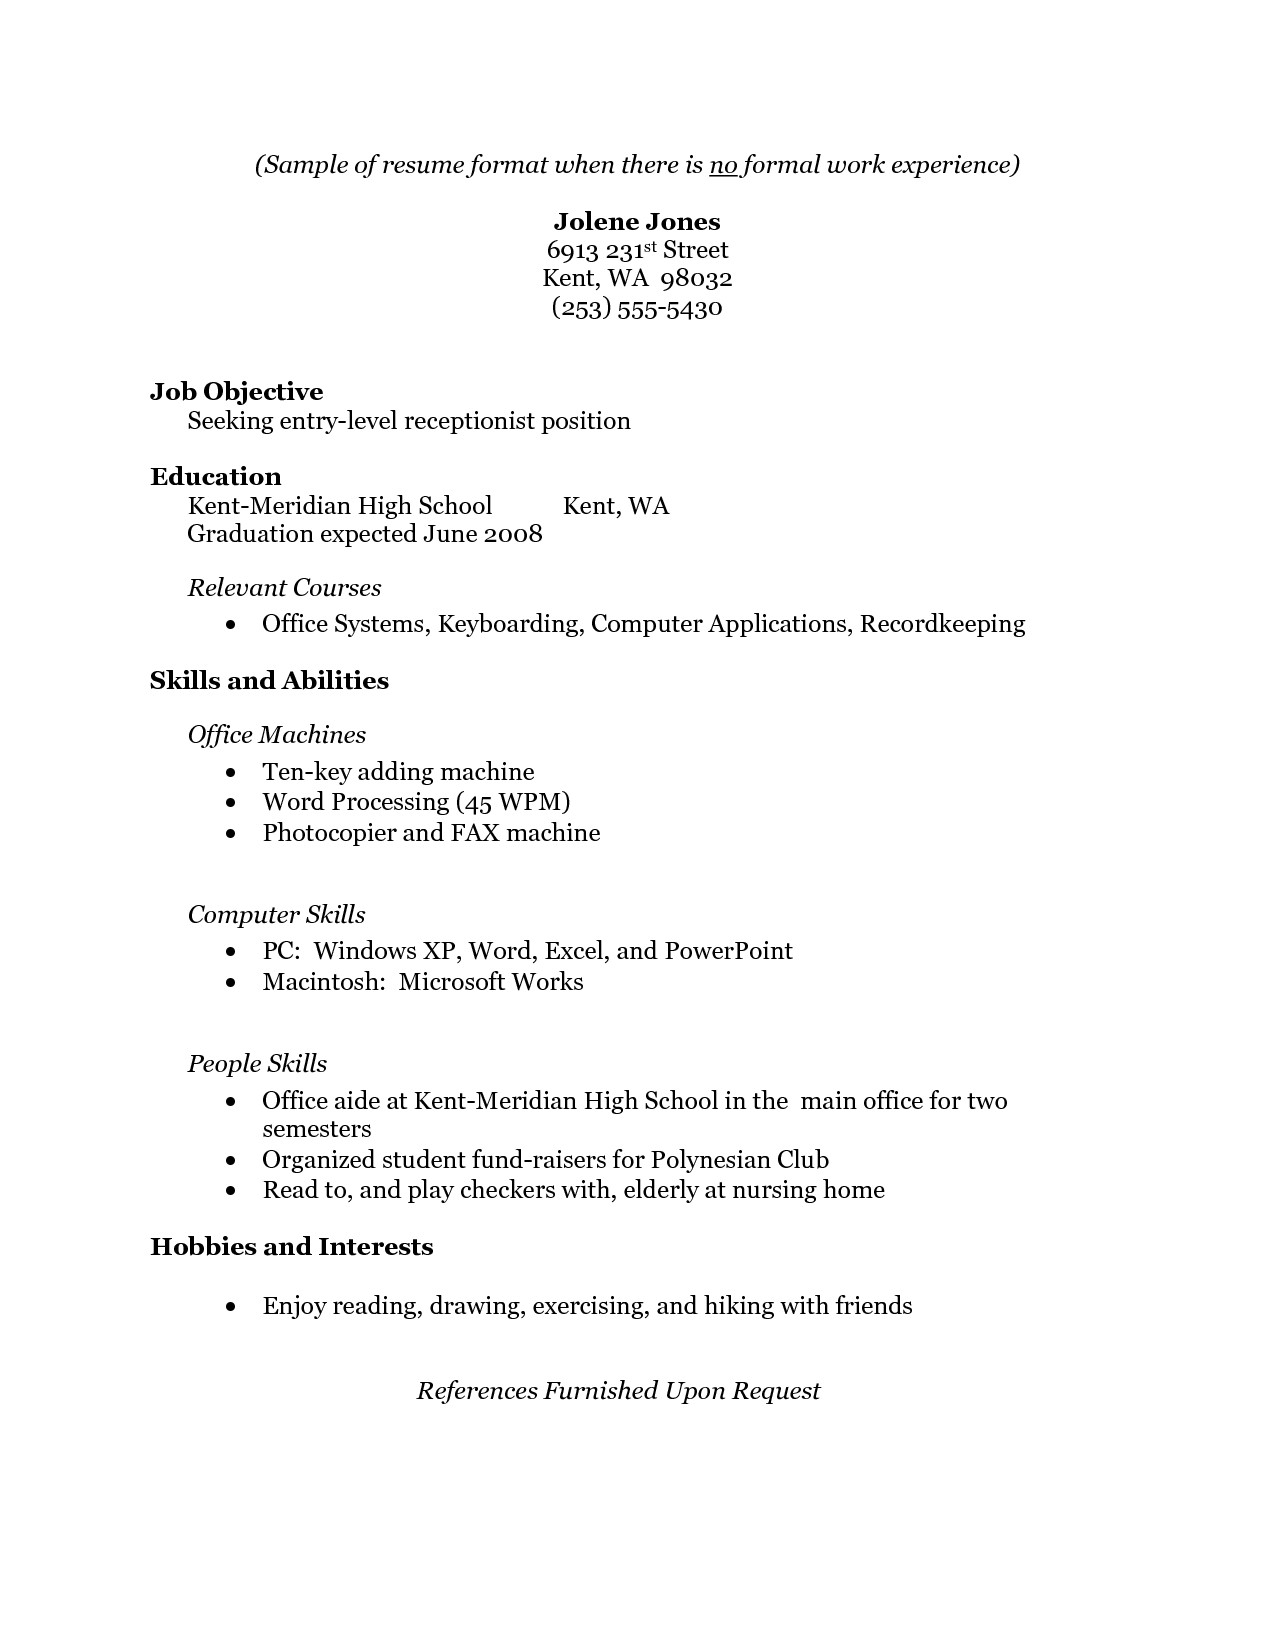 Sample Resume for someone with Little Experience Job Resume No Experience Examples